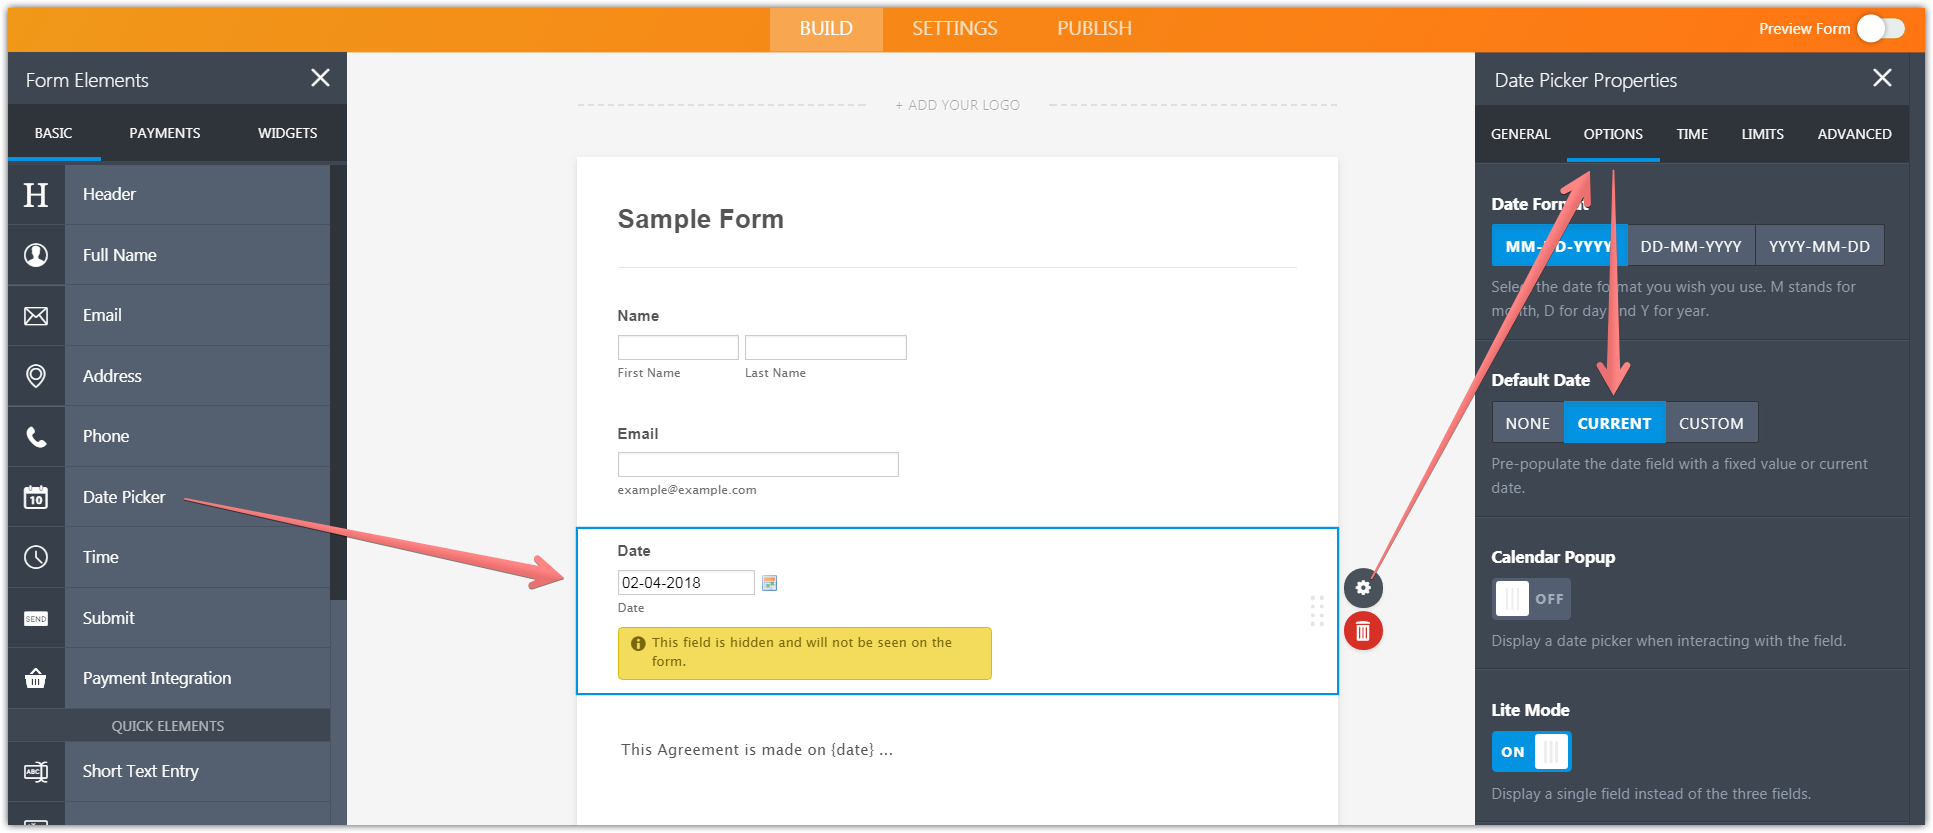 Getting signatures and form fields data in PDF Image 1 Screenshot 40